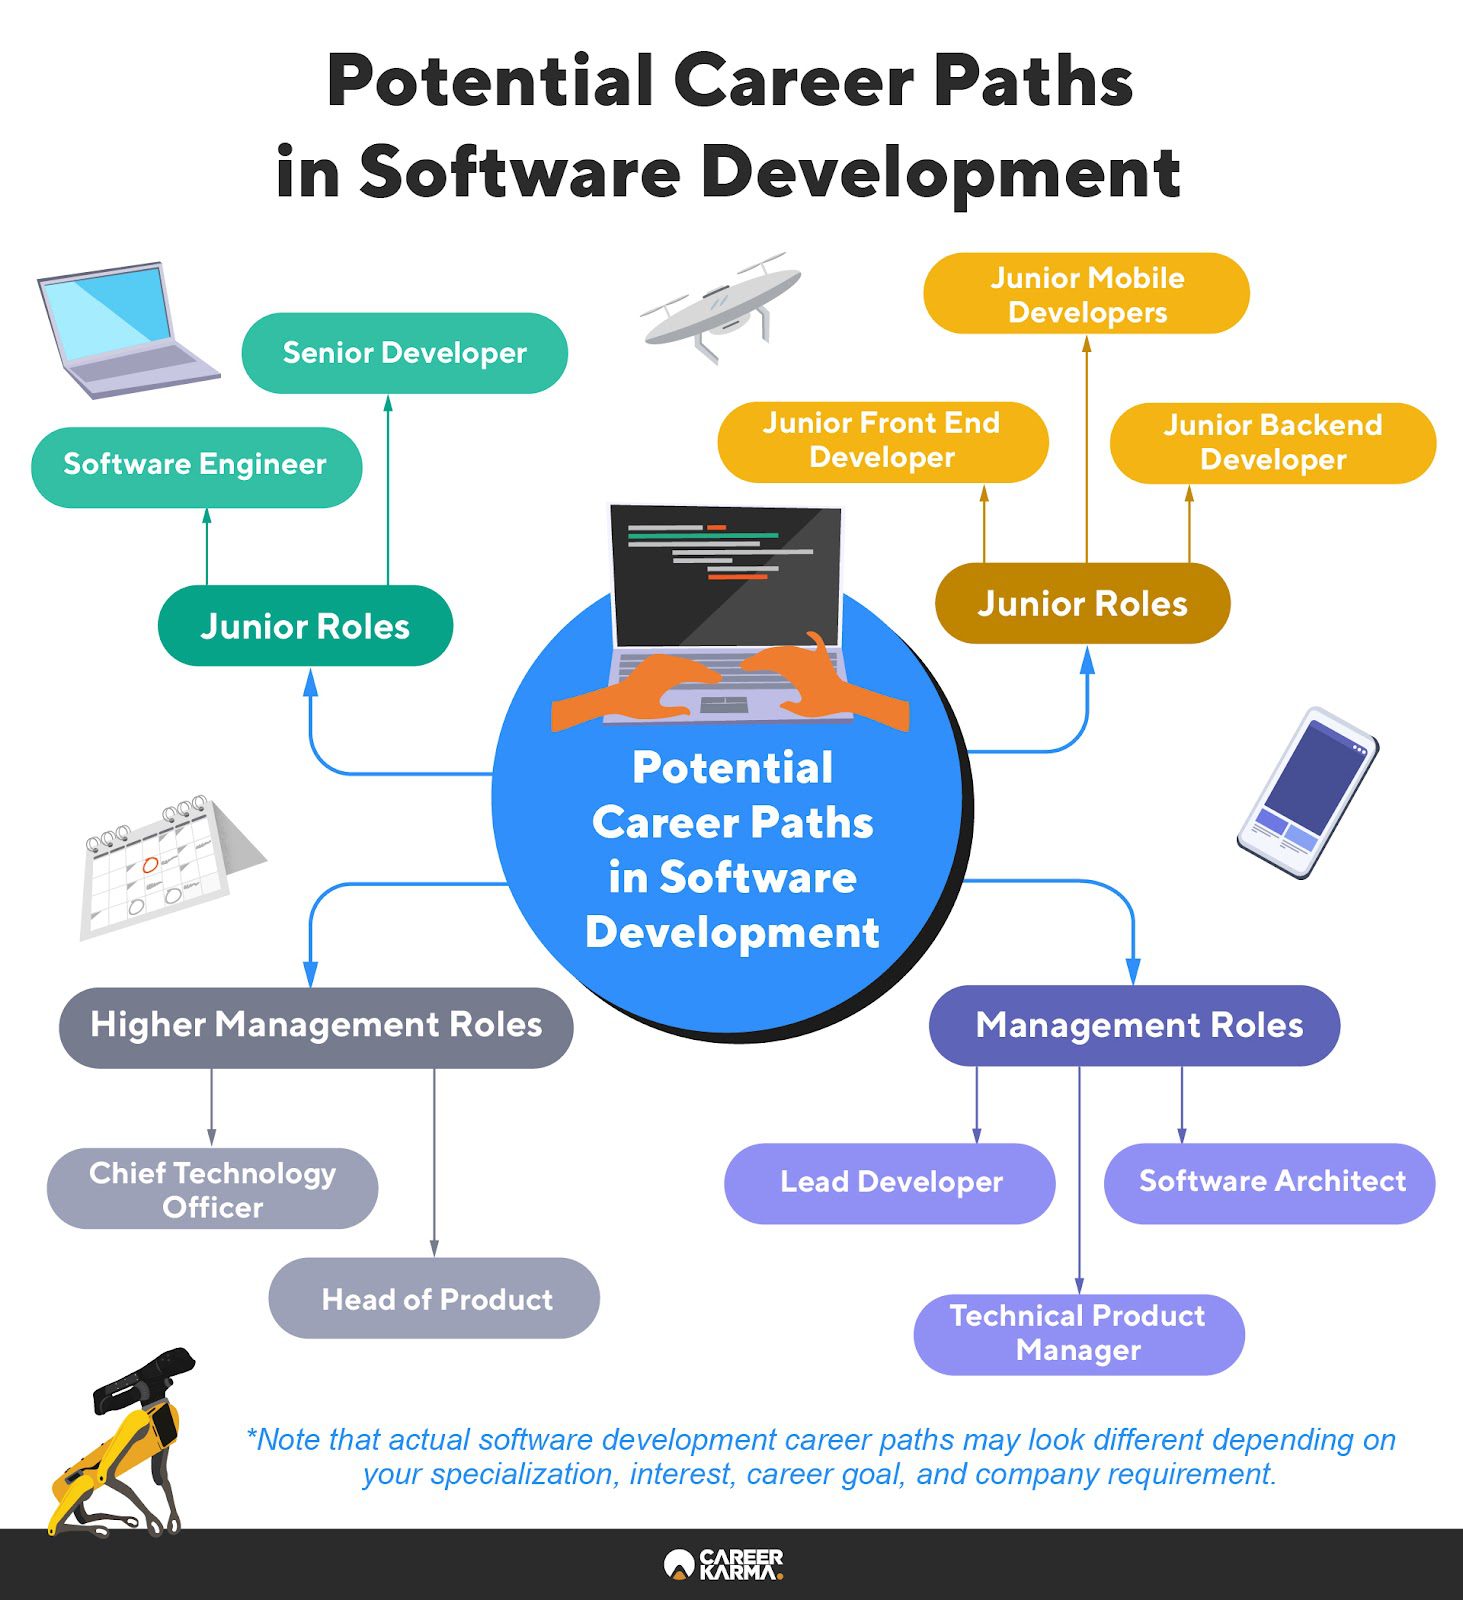 An infographic featuring a map of possible career paths in software development